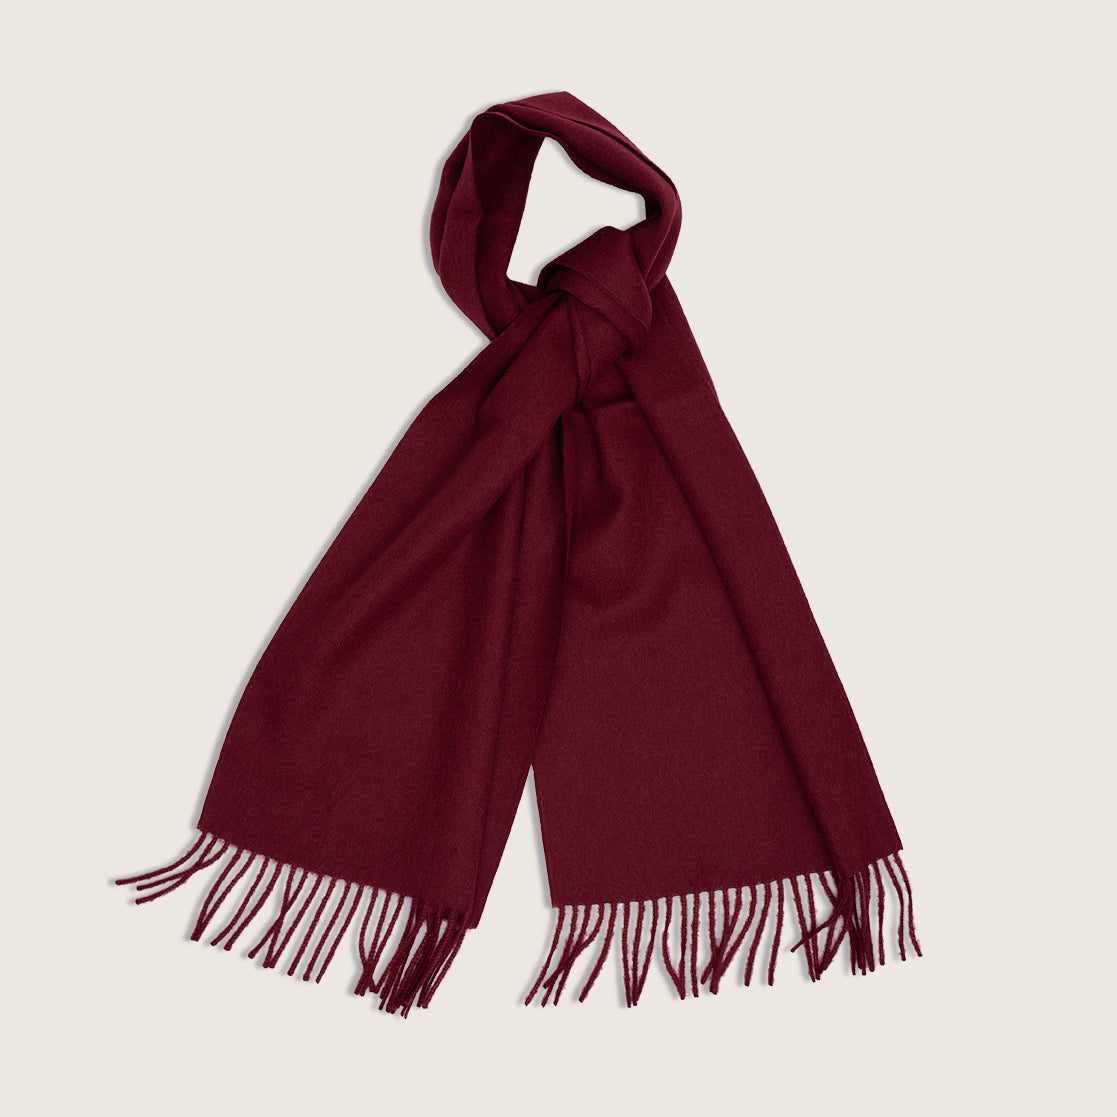 French contemporary artisan brand Timothee Paris bordeaux baby alpaca minimal scarf knotted